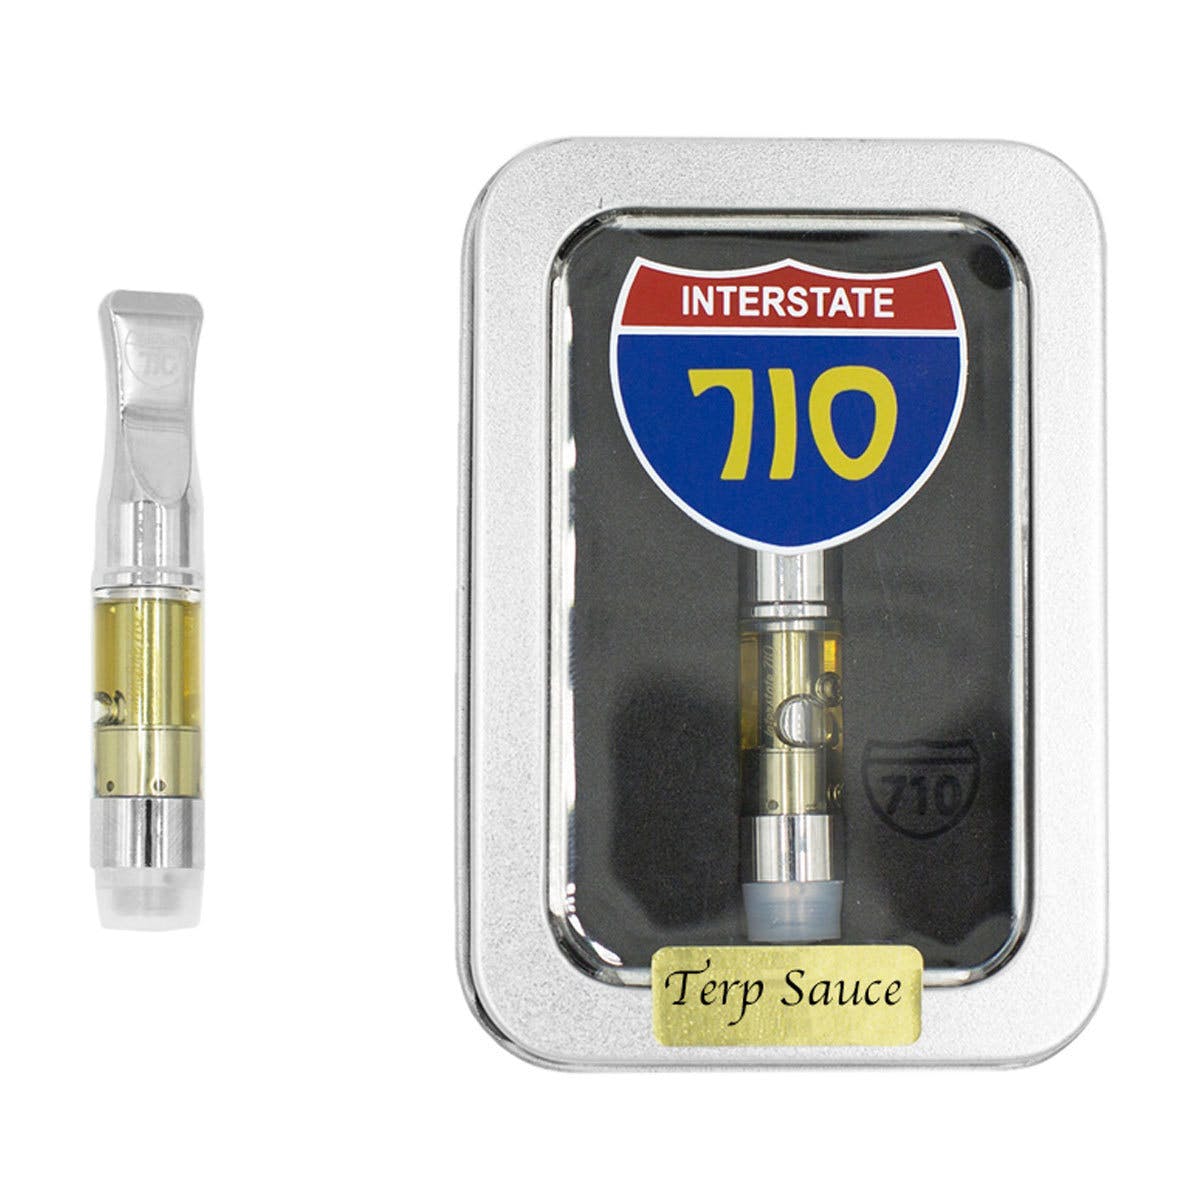 concentrate-interstate-cannabinoids-710-terp-sauce-cartridge